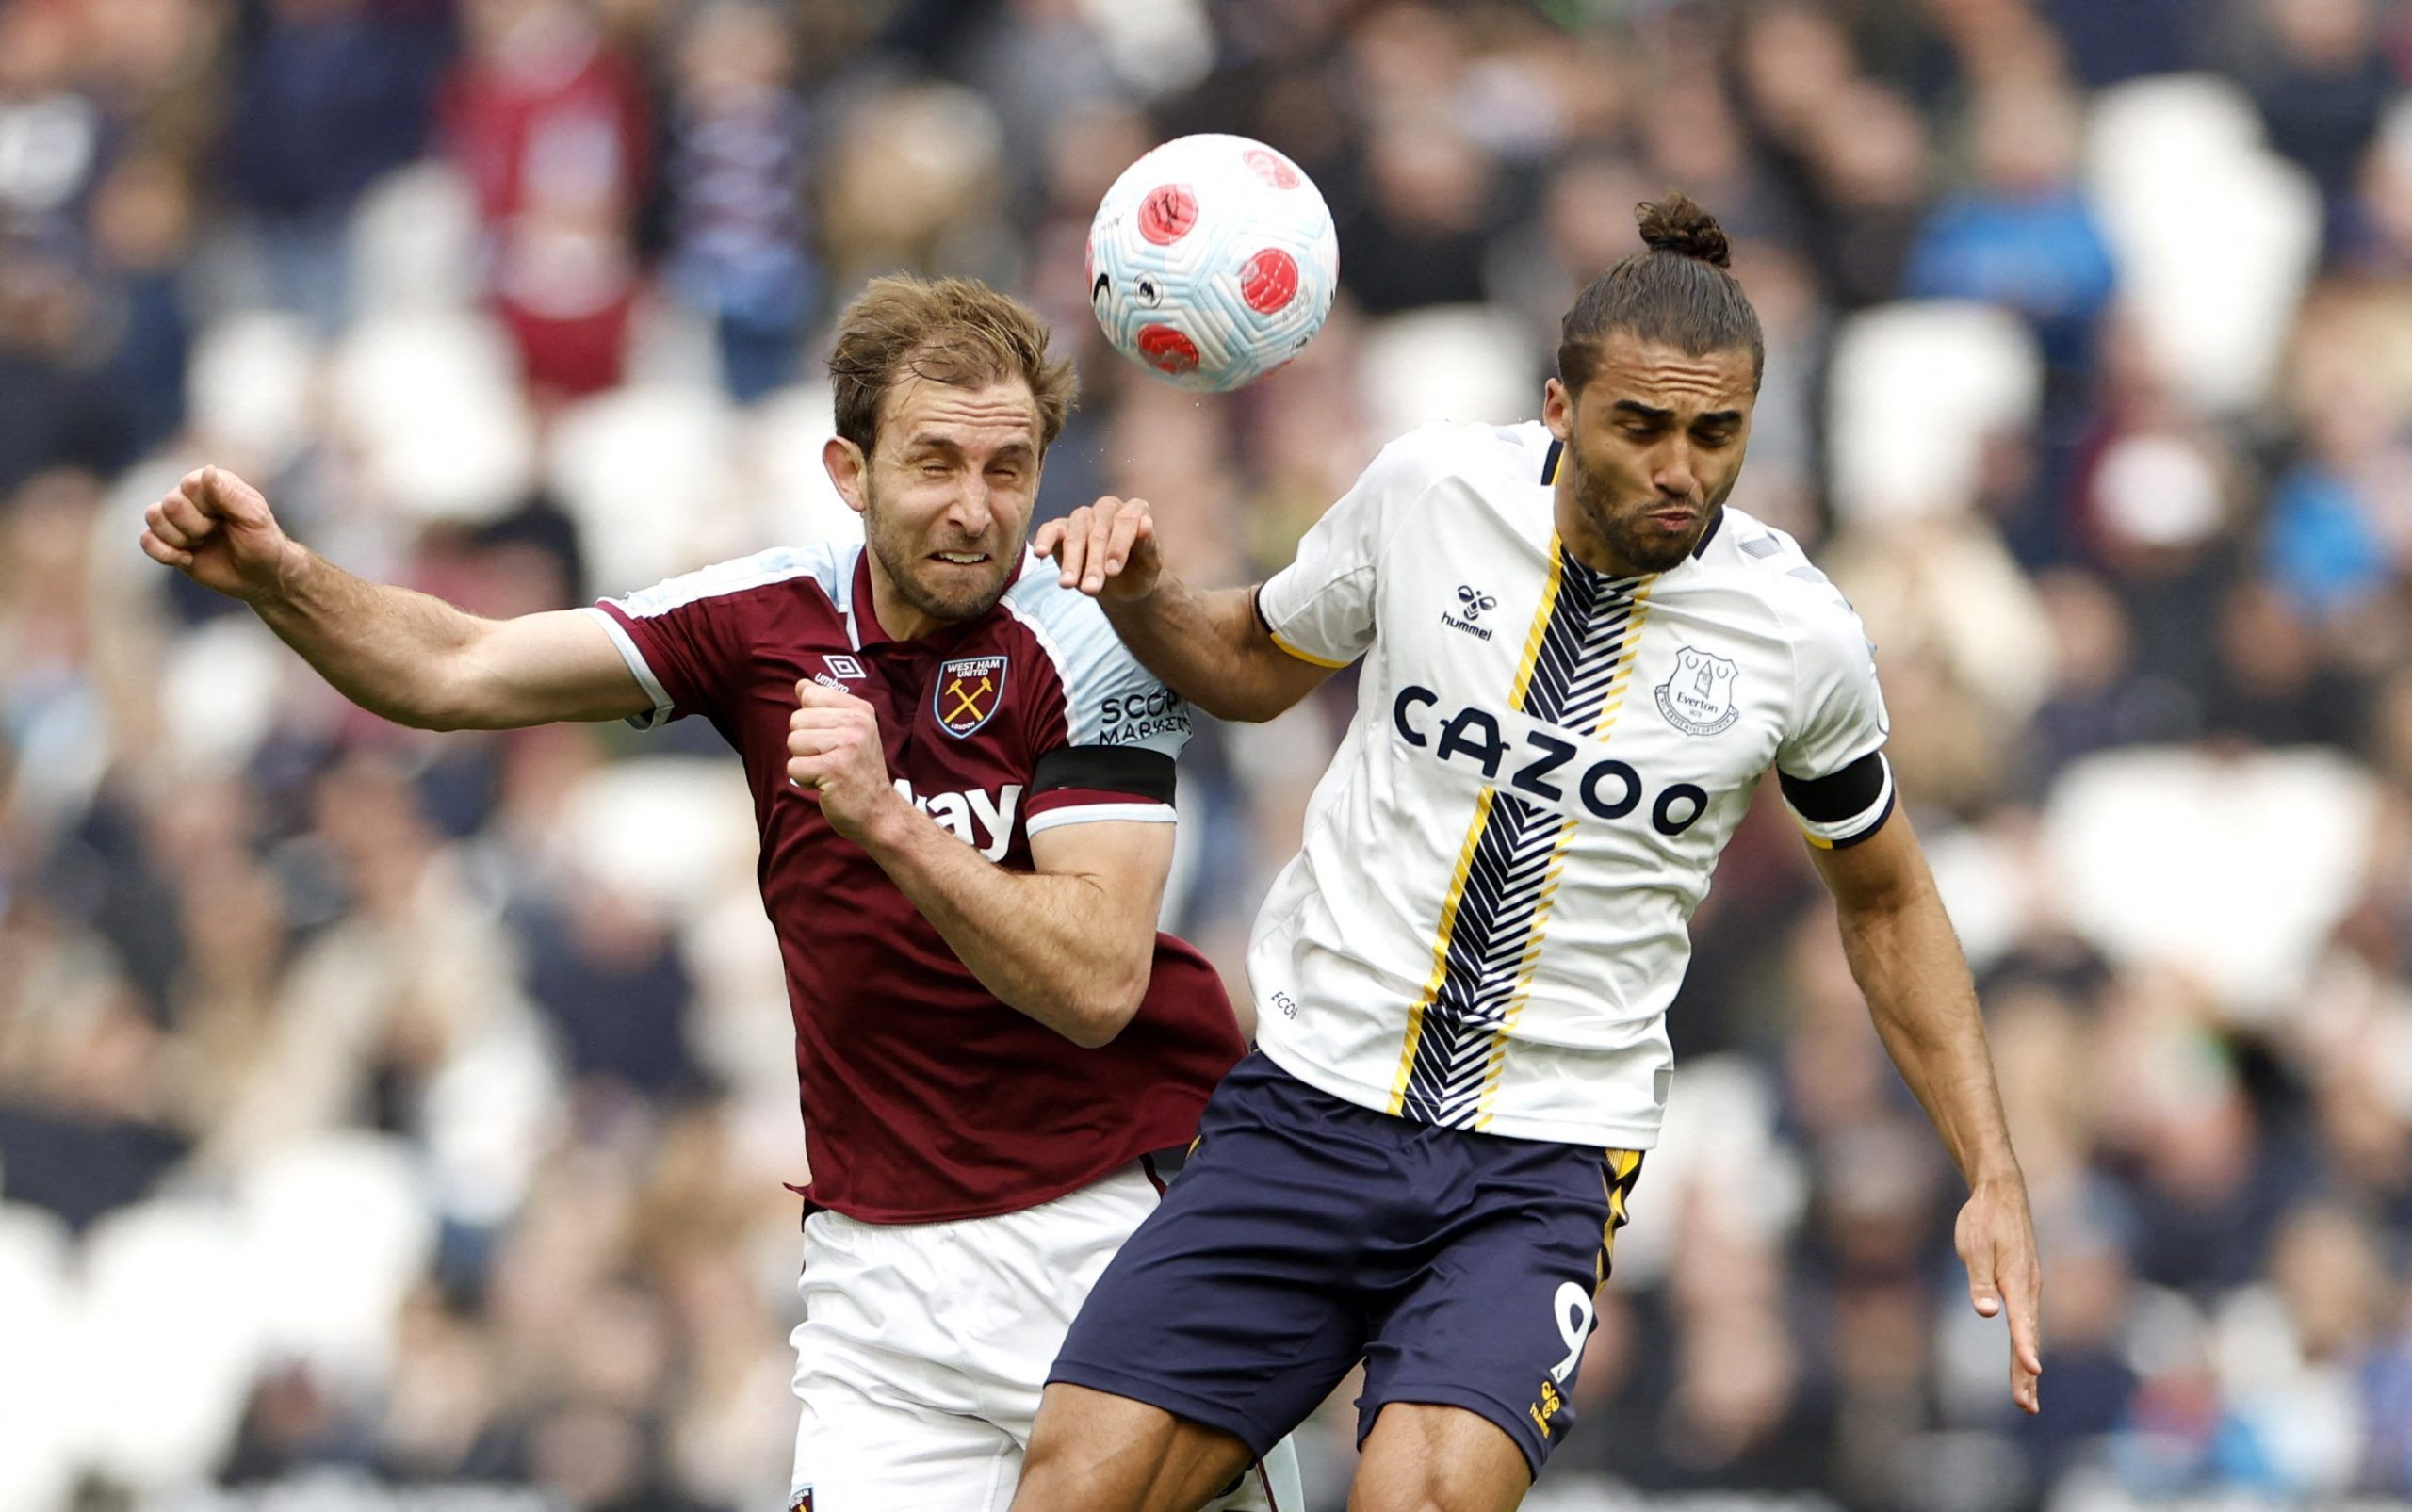 Soccer Football - Premier League - West Ham United v Everton - London Stadium, London, Britain - April 3, 2022 West Ham United's Craig Dawson in action with  Everton's Dominic Calvert-Lewin Action Images via Reuters/Peter Cziborra EDITORIAL USE ONLY. No use with unauthorized audio, video, data, fixture lists, club/league logos or 'live' services. Online in-match use limited to 75 images, no video emulation. No use in betting, games or single club /league/player publications.  Please contact your